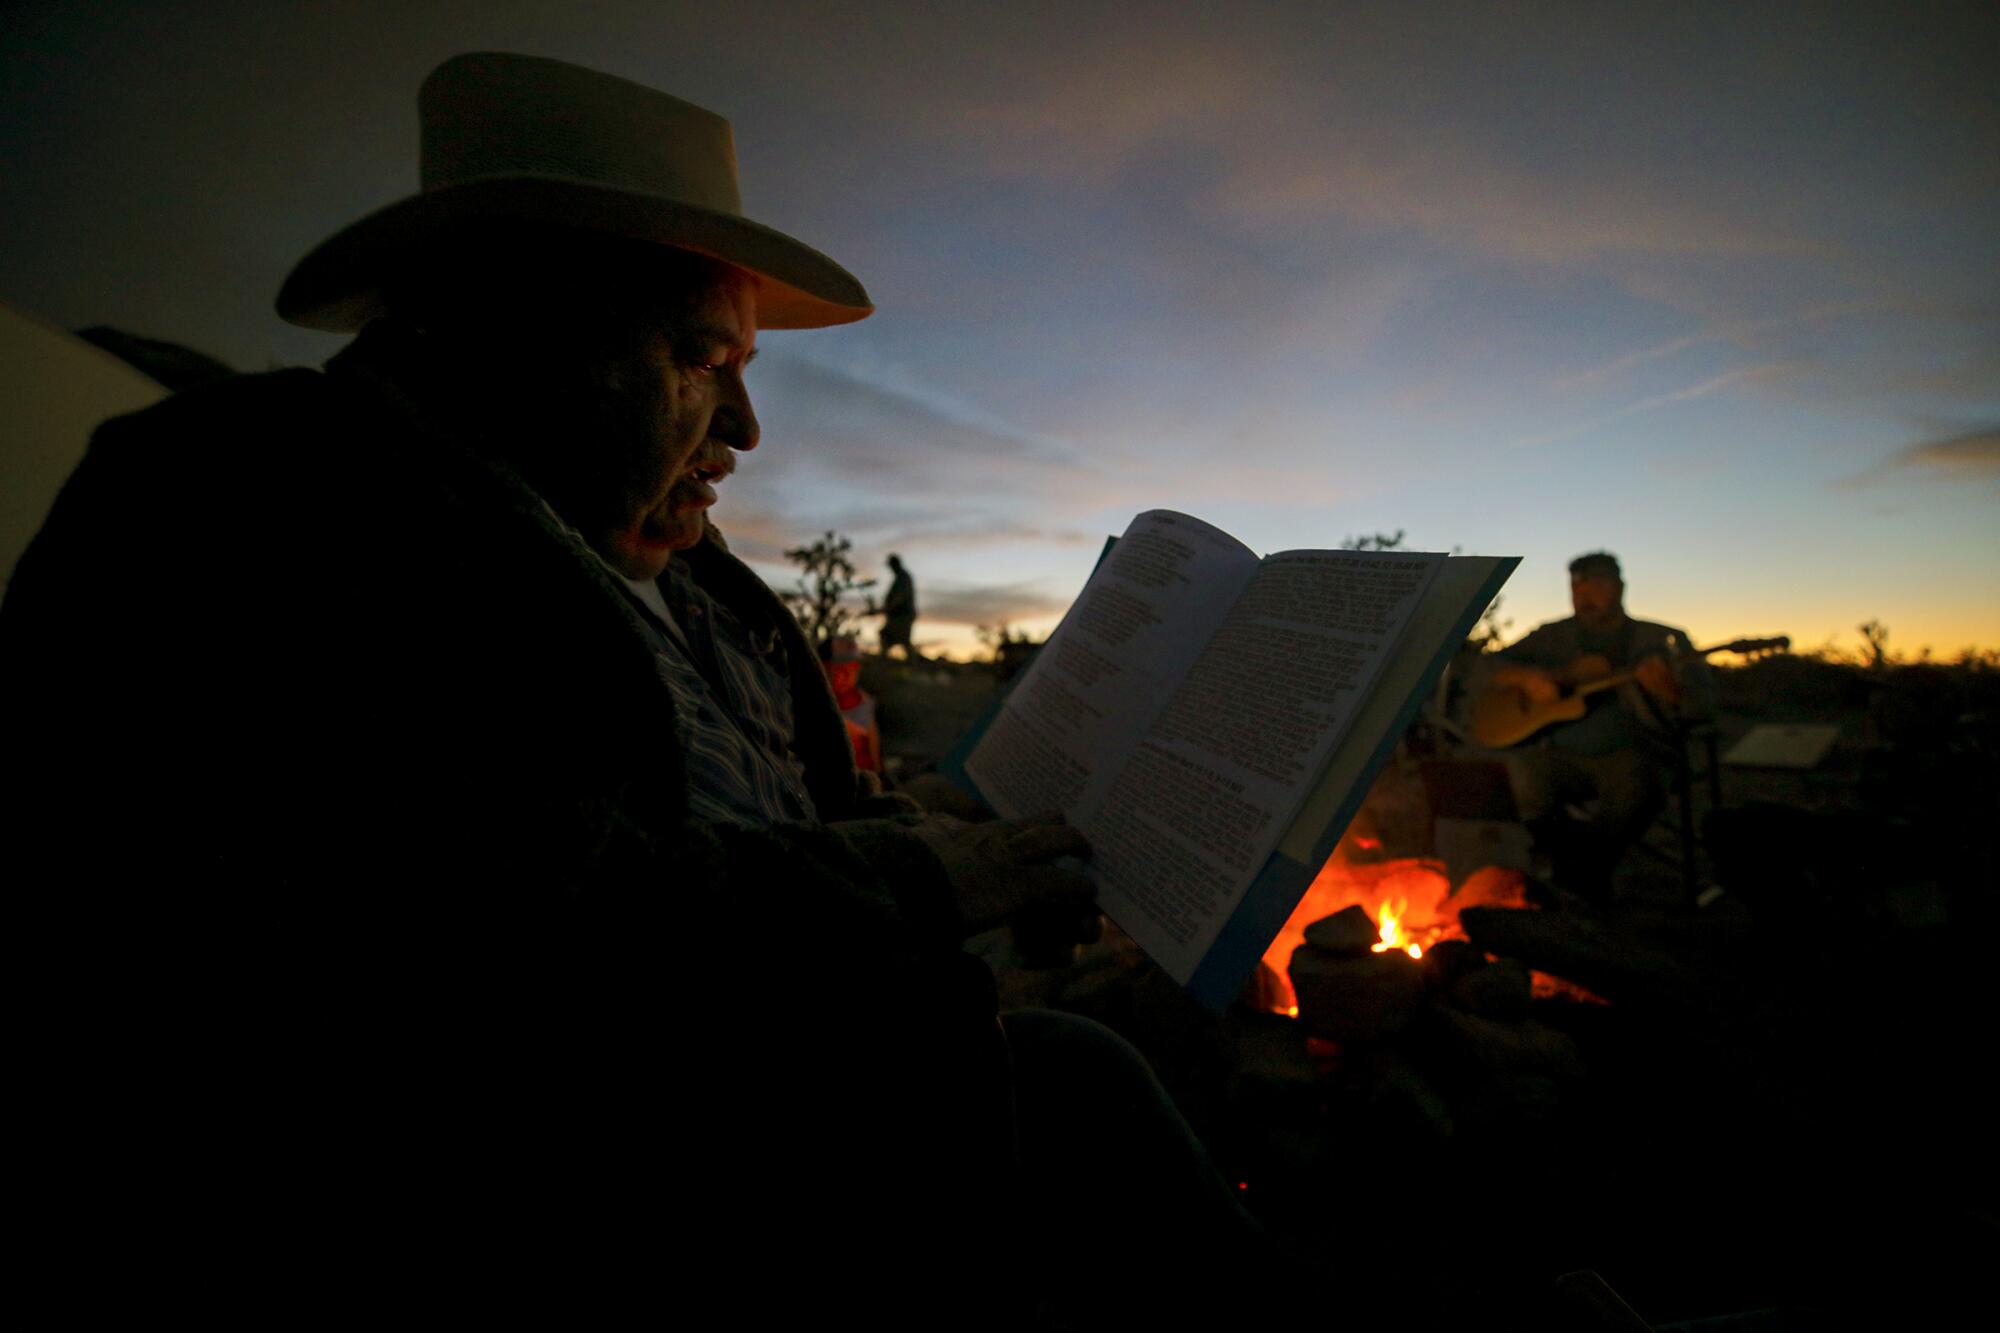 Home missionary Larry Craig goes over his sermon the night before sunrise Easter service.